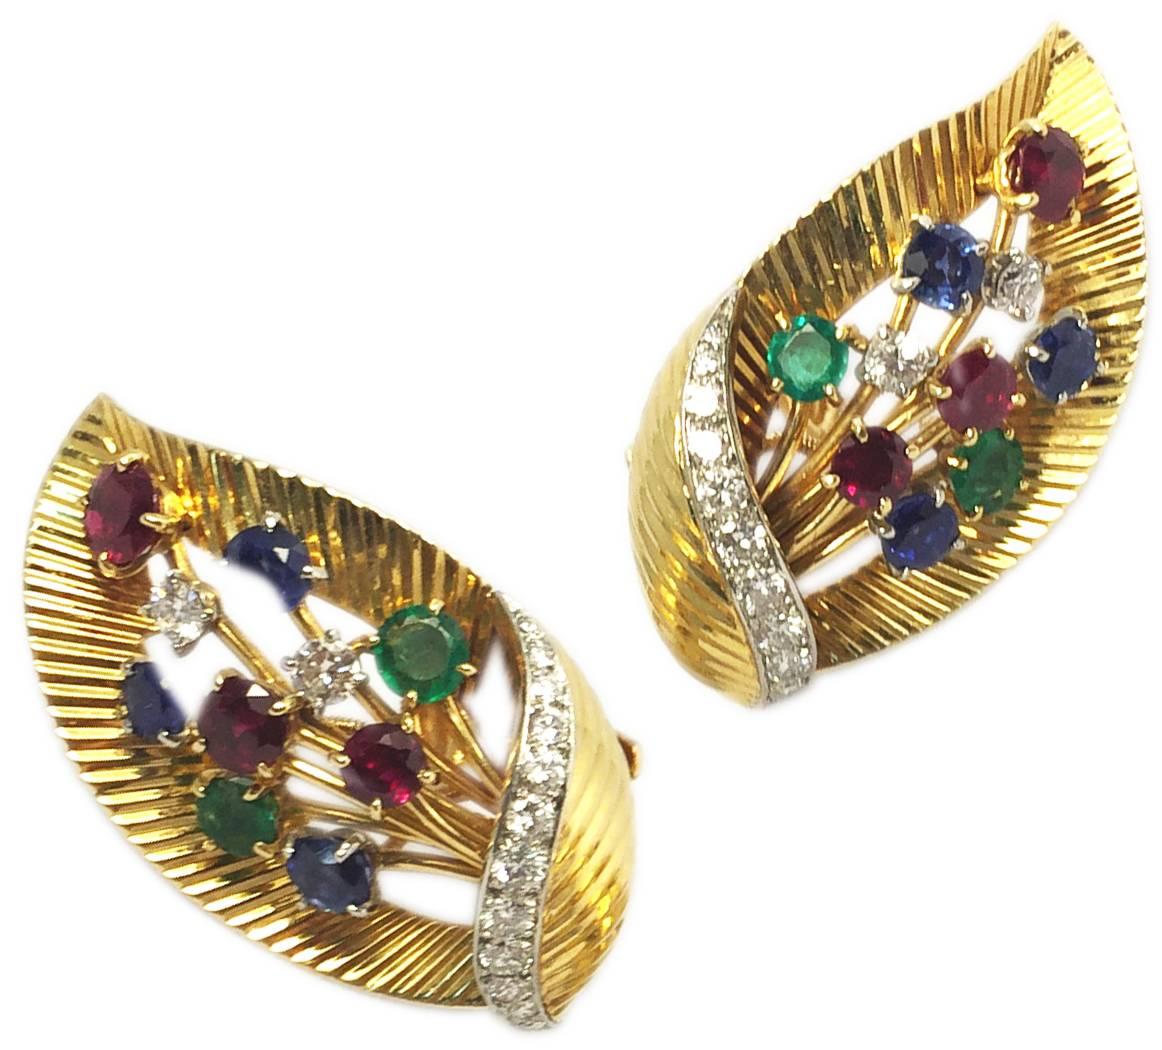 An exquisite pair of Cartier earclips in the shape of a leaf, embracing a floral bouquet of round cut rubies, sapphires, emeralds and diamonds. Made in 18kt yellow gold. Cartier Paris, circa 1950.